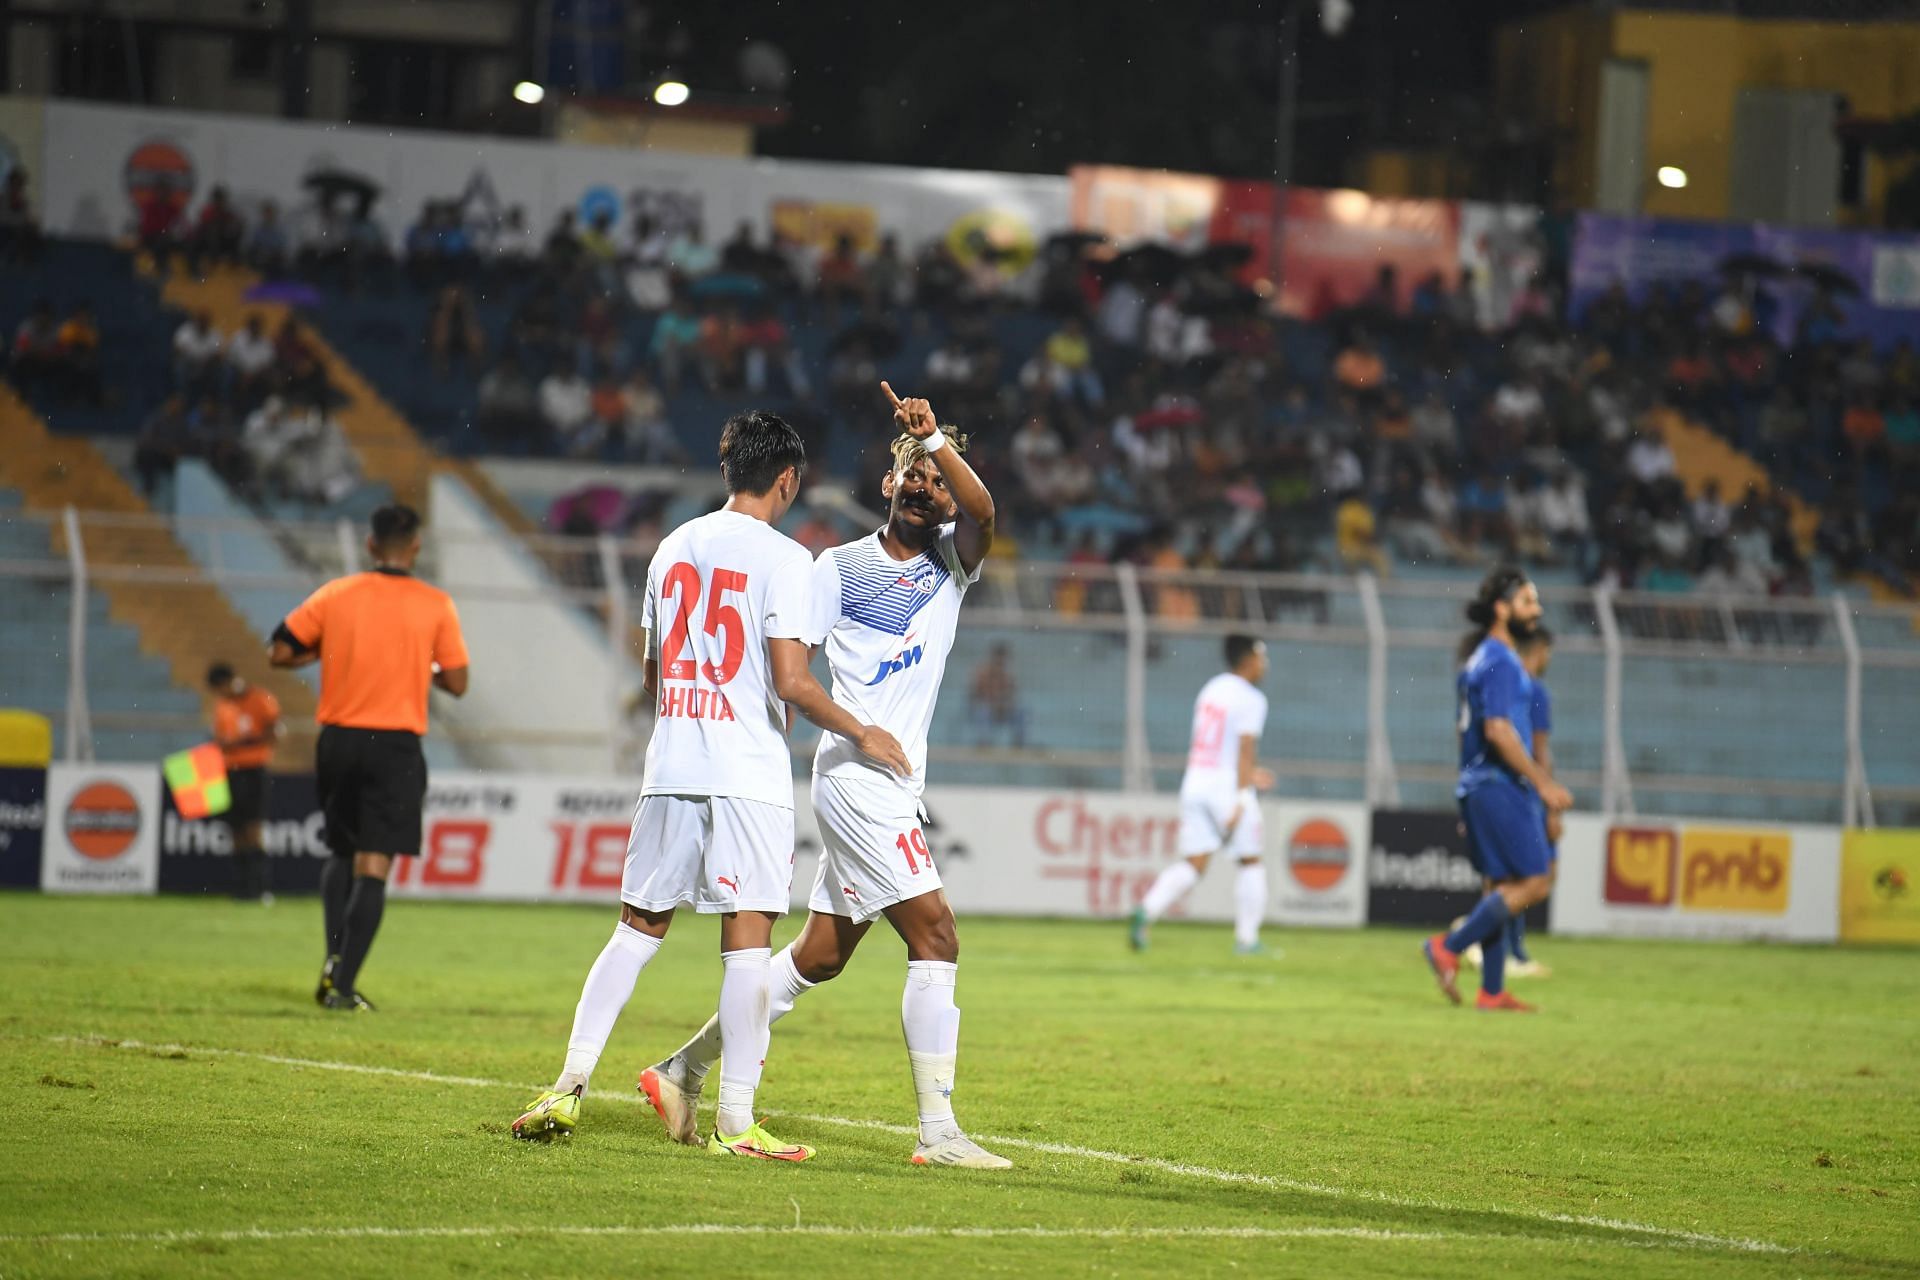 Bengaluru FC romped to an easy win again Indian Air Force FT. [Credits: Suman Chattopadhyay/www.imagesolutionr.in]